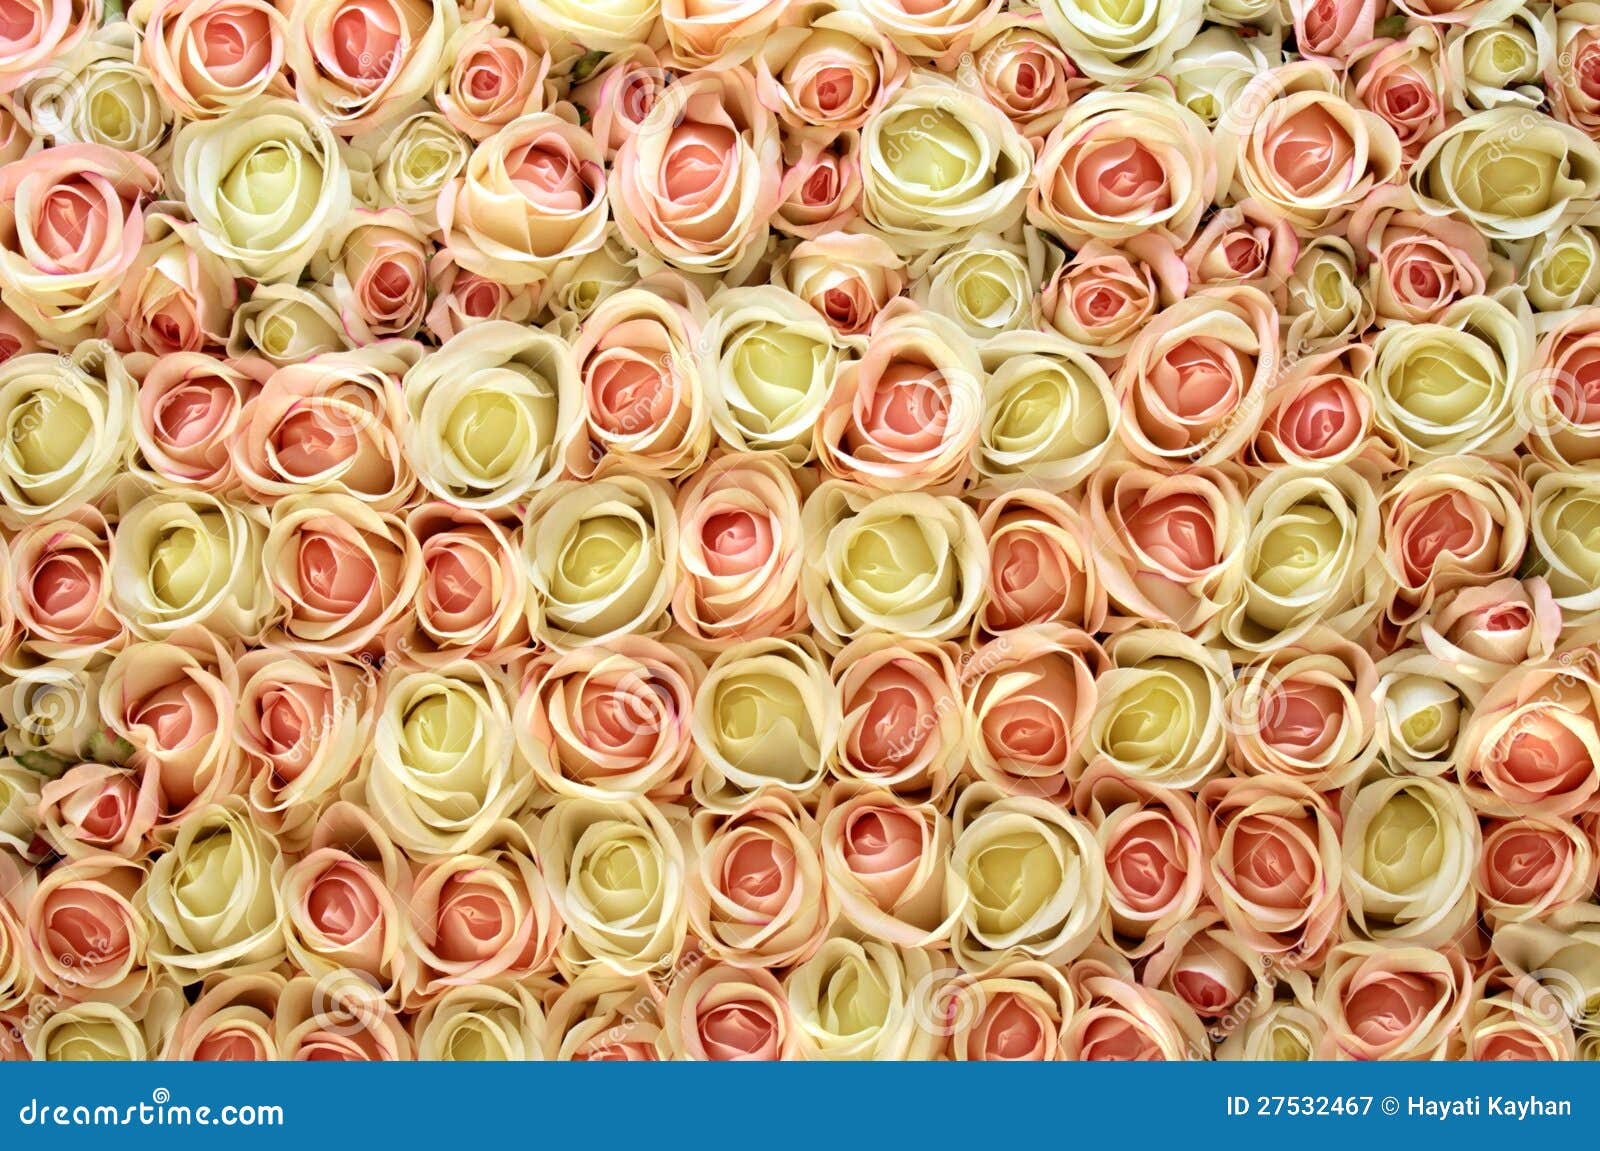 Pink And White Roses Background Royalty Free Stock Photography Image